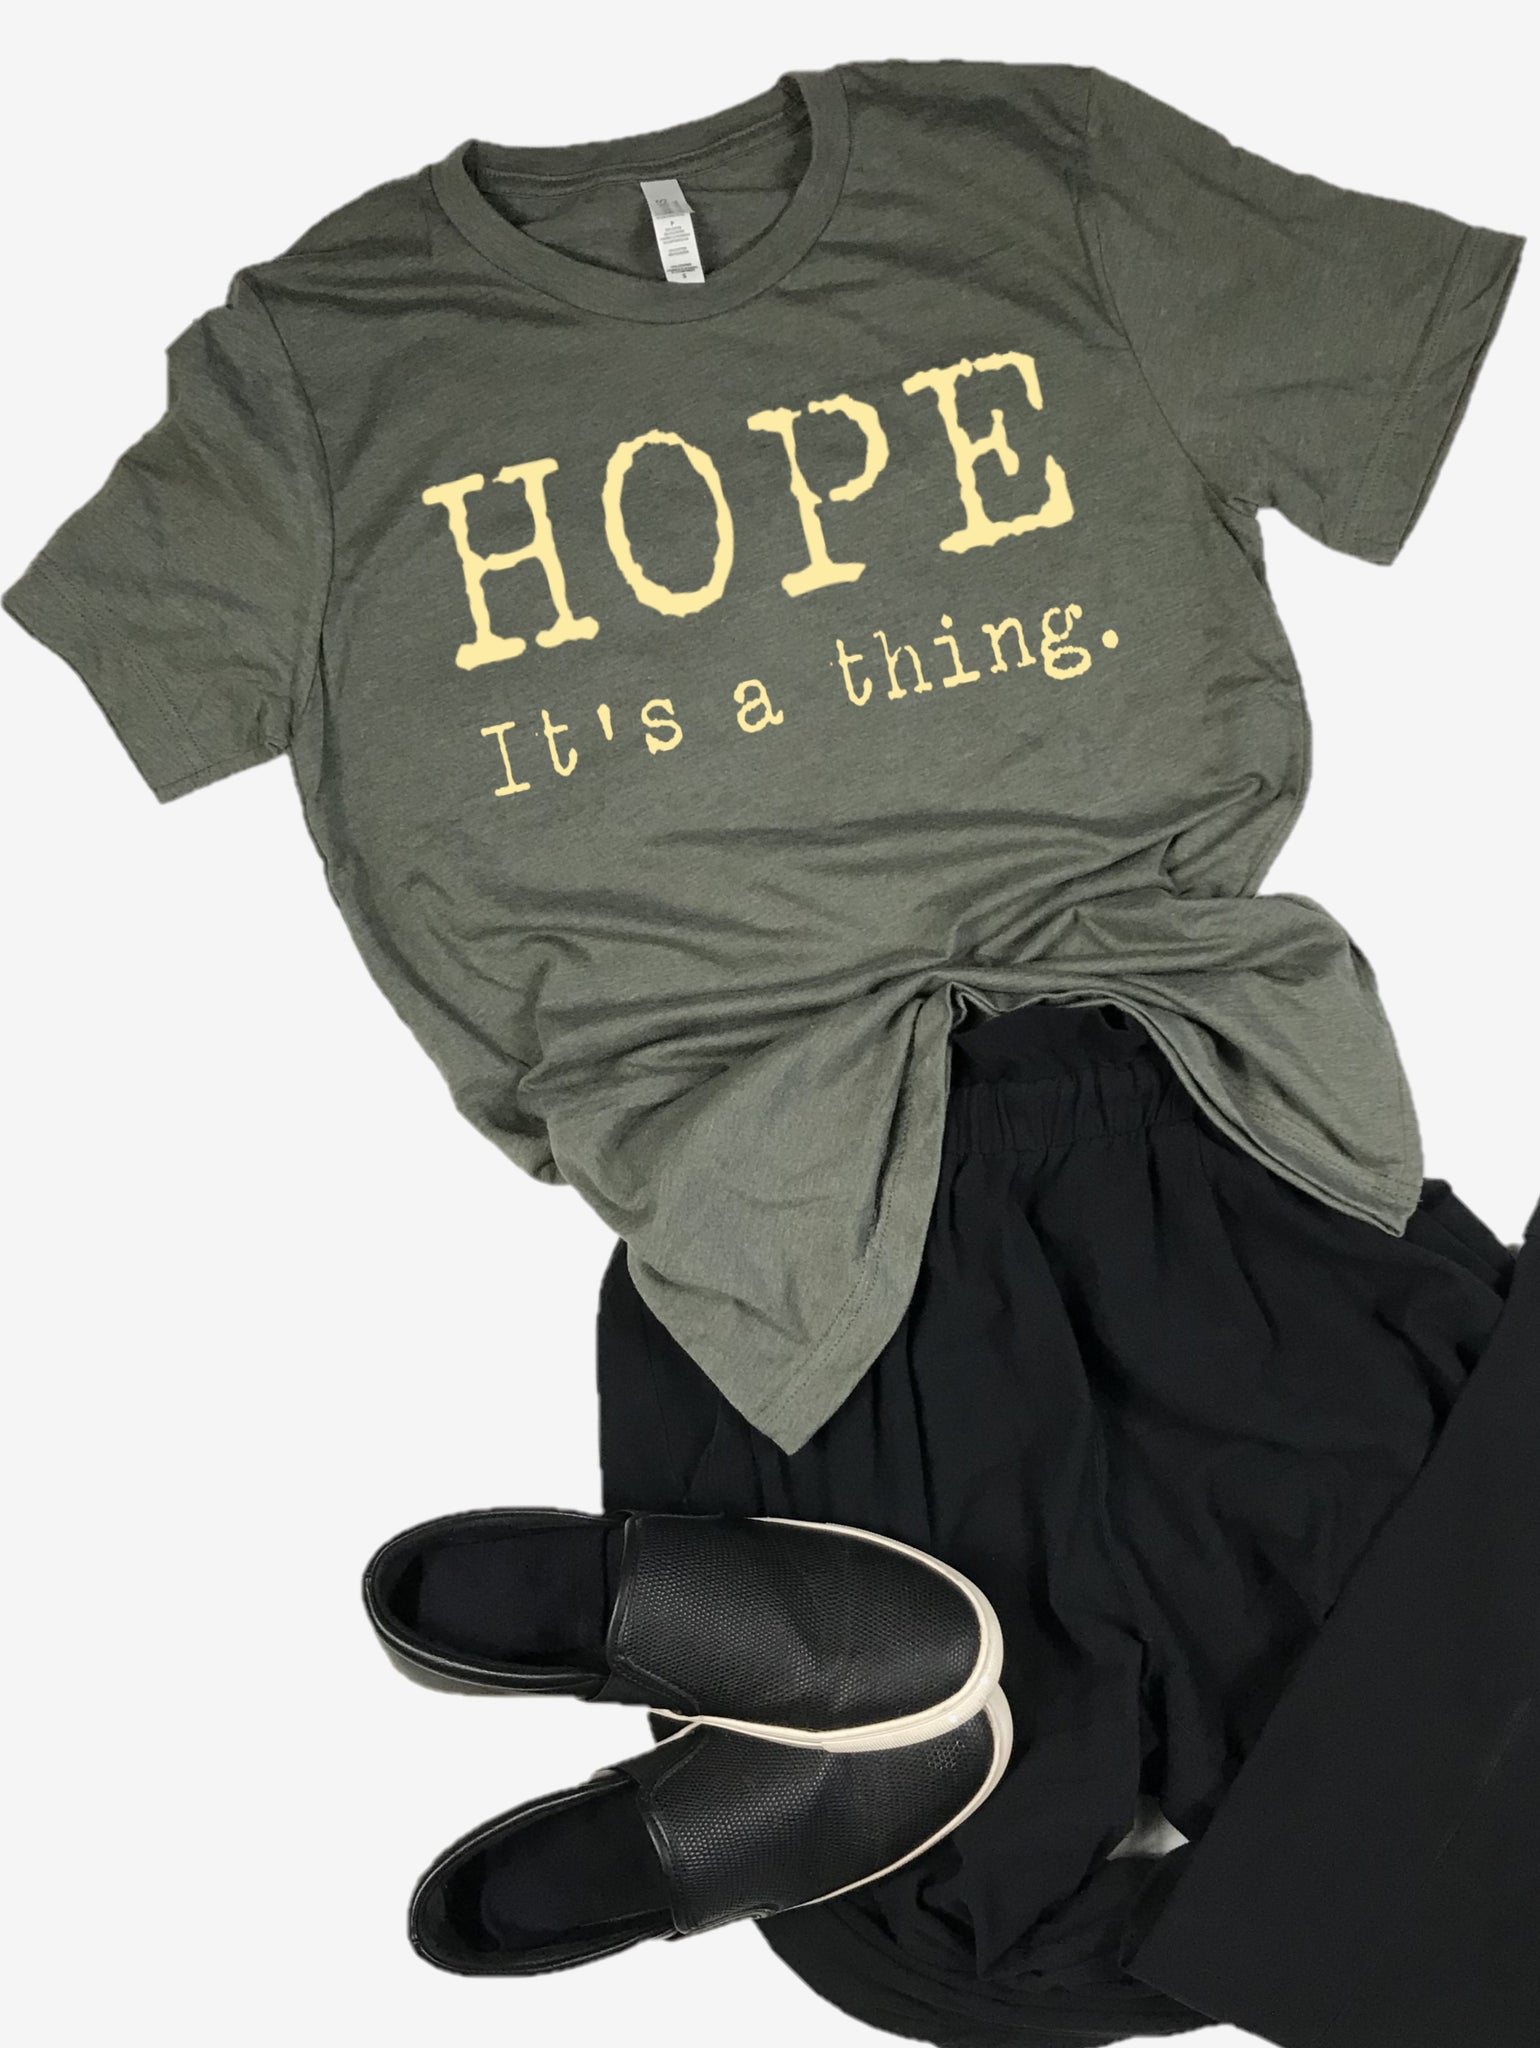 "Hope. It's a thing." Short Sleeve Tee Shirt, Crew Neck, Heather Military Green